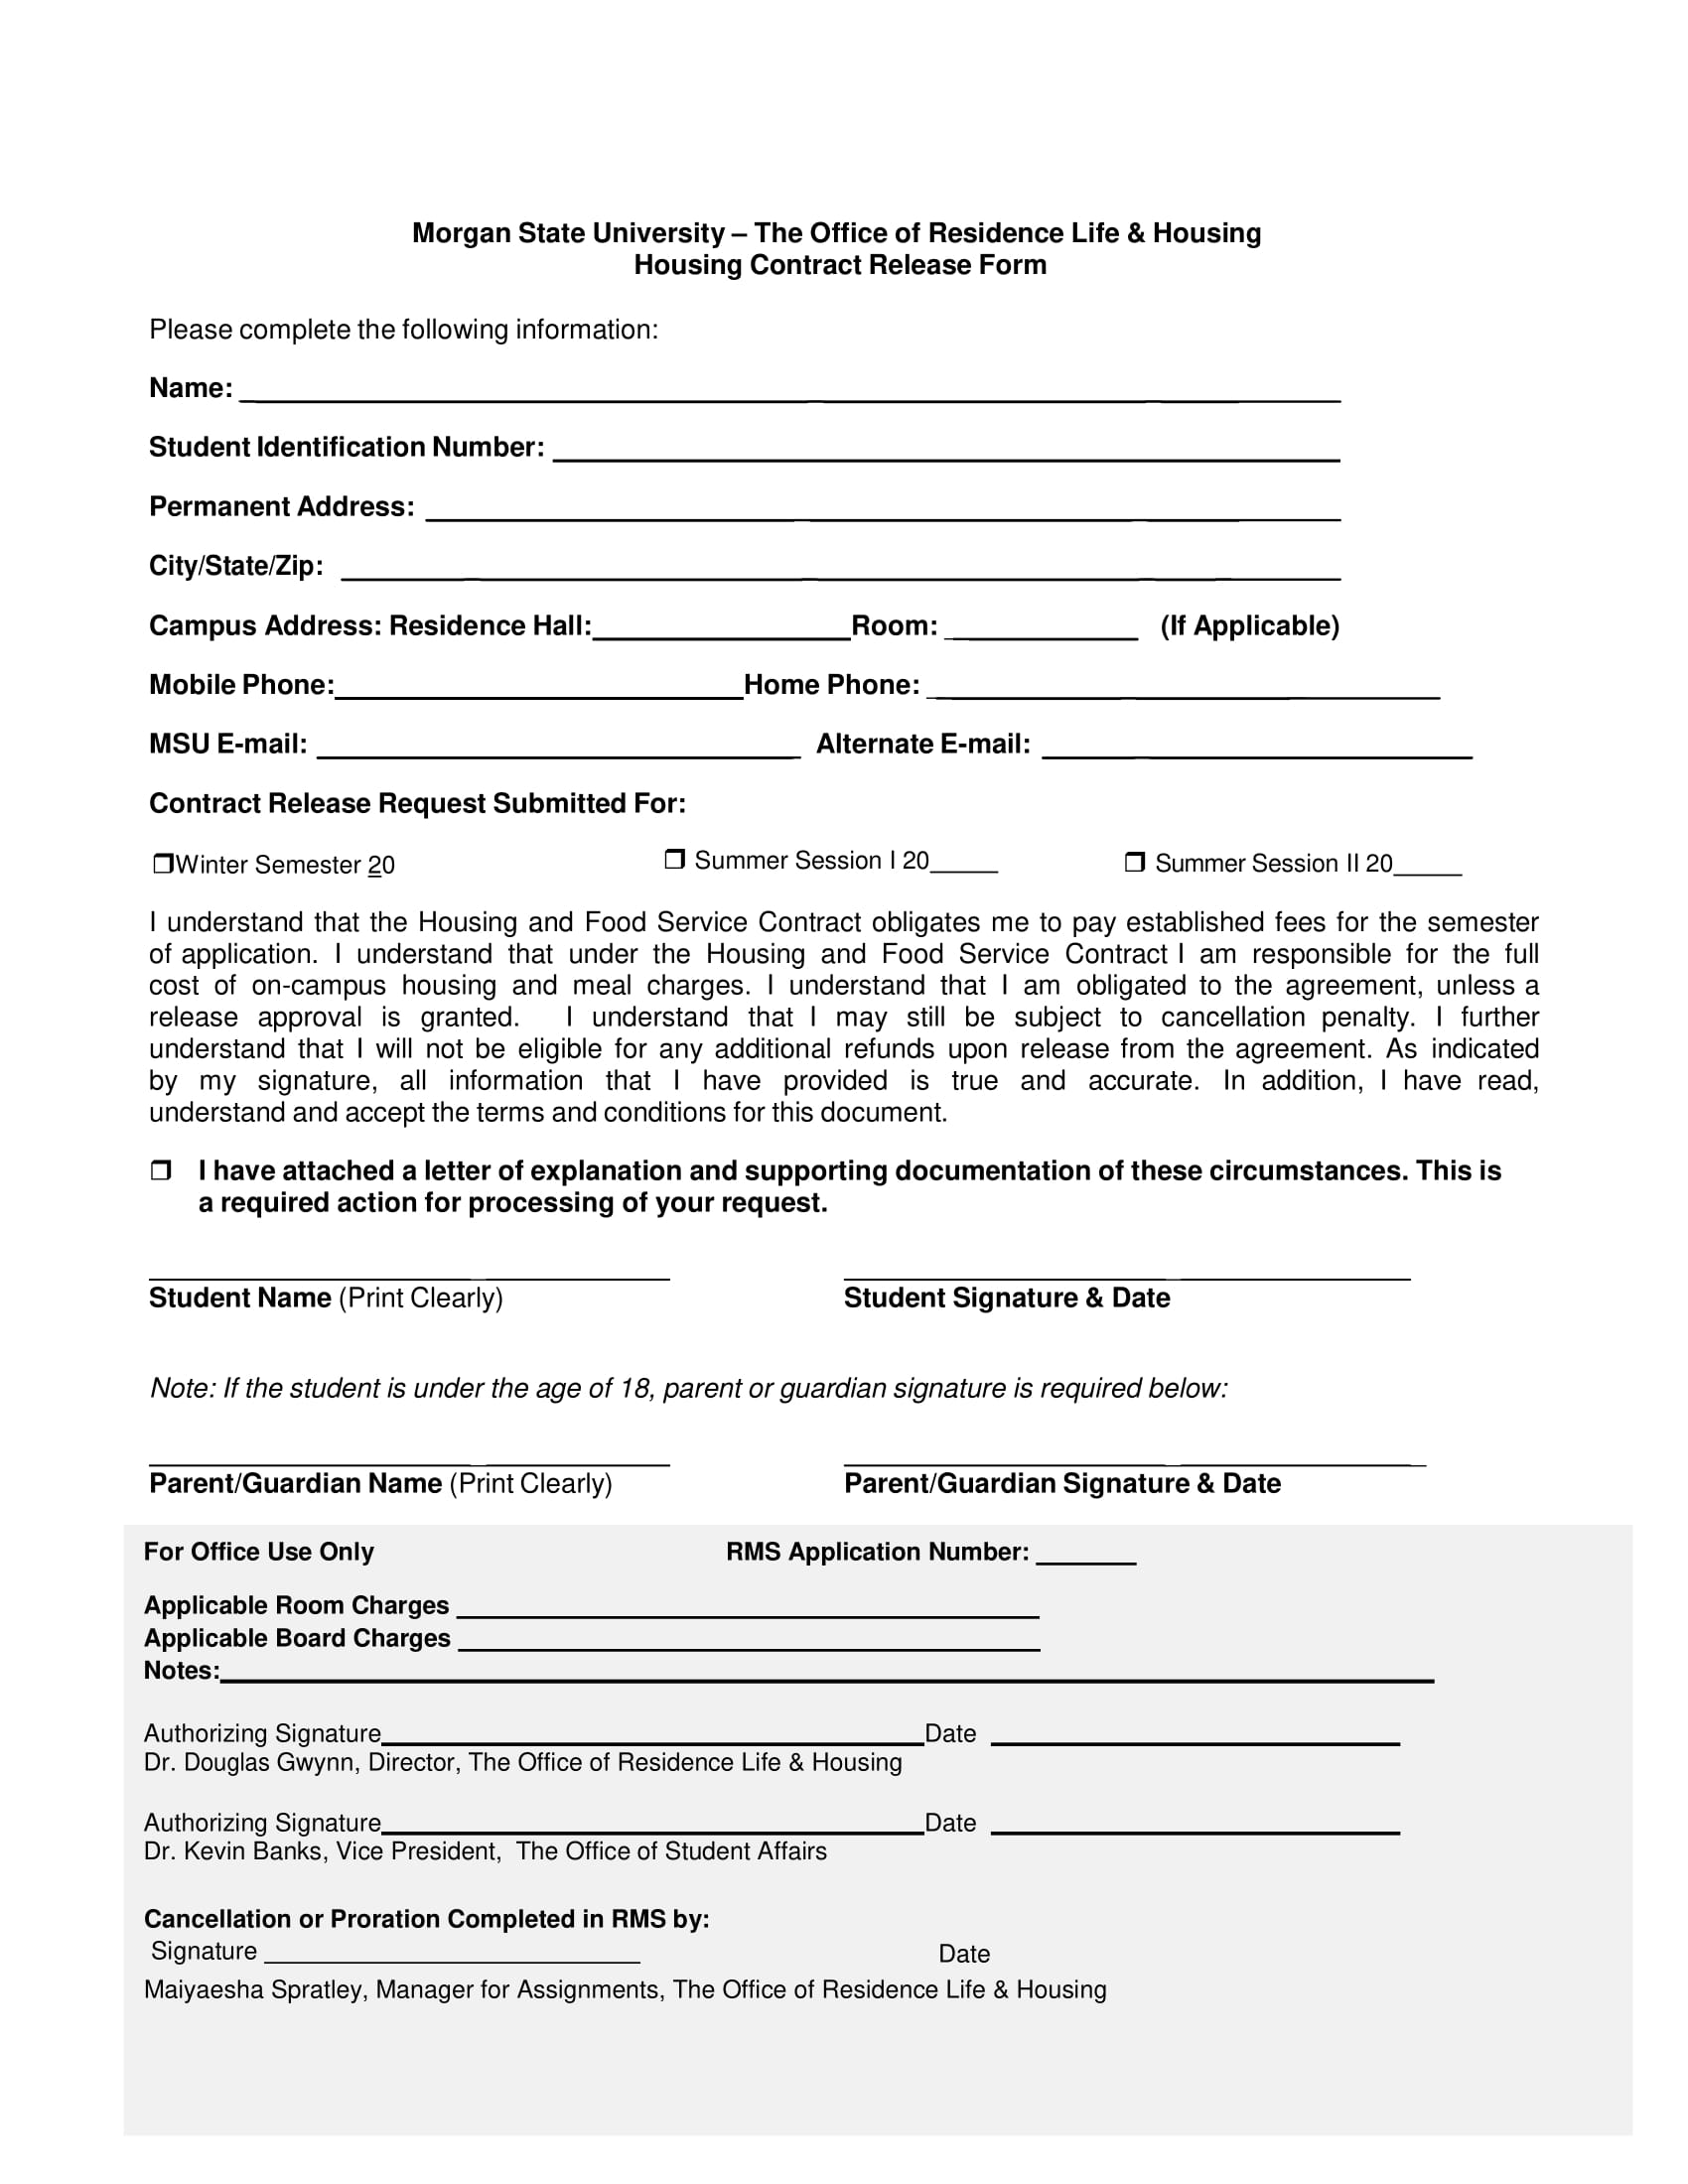 housing contract release form 2